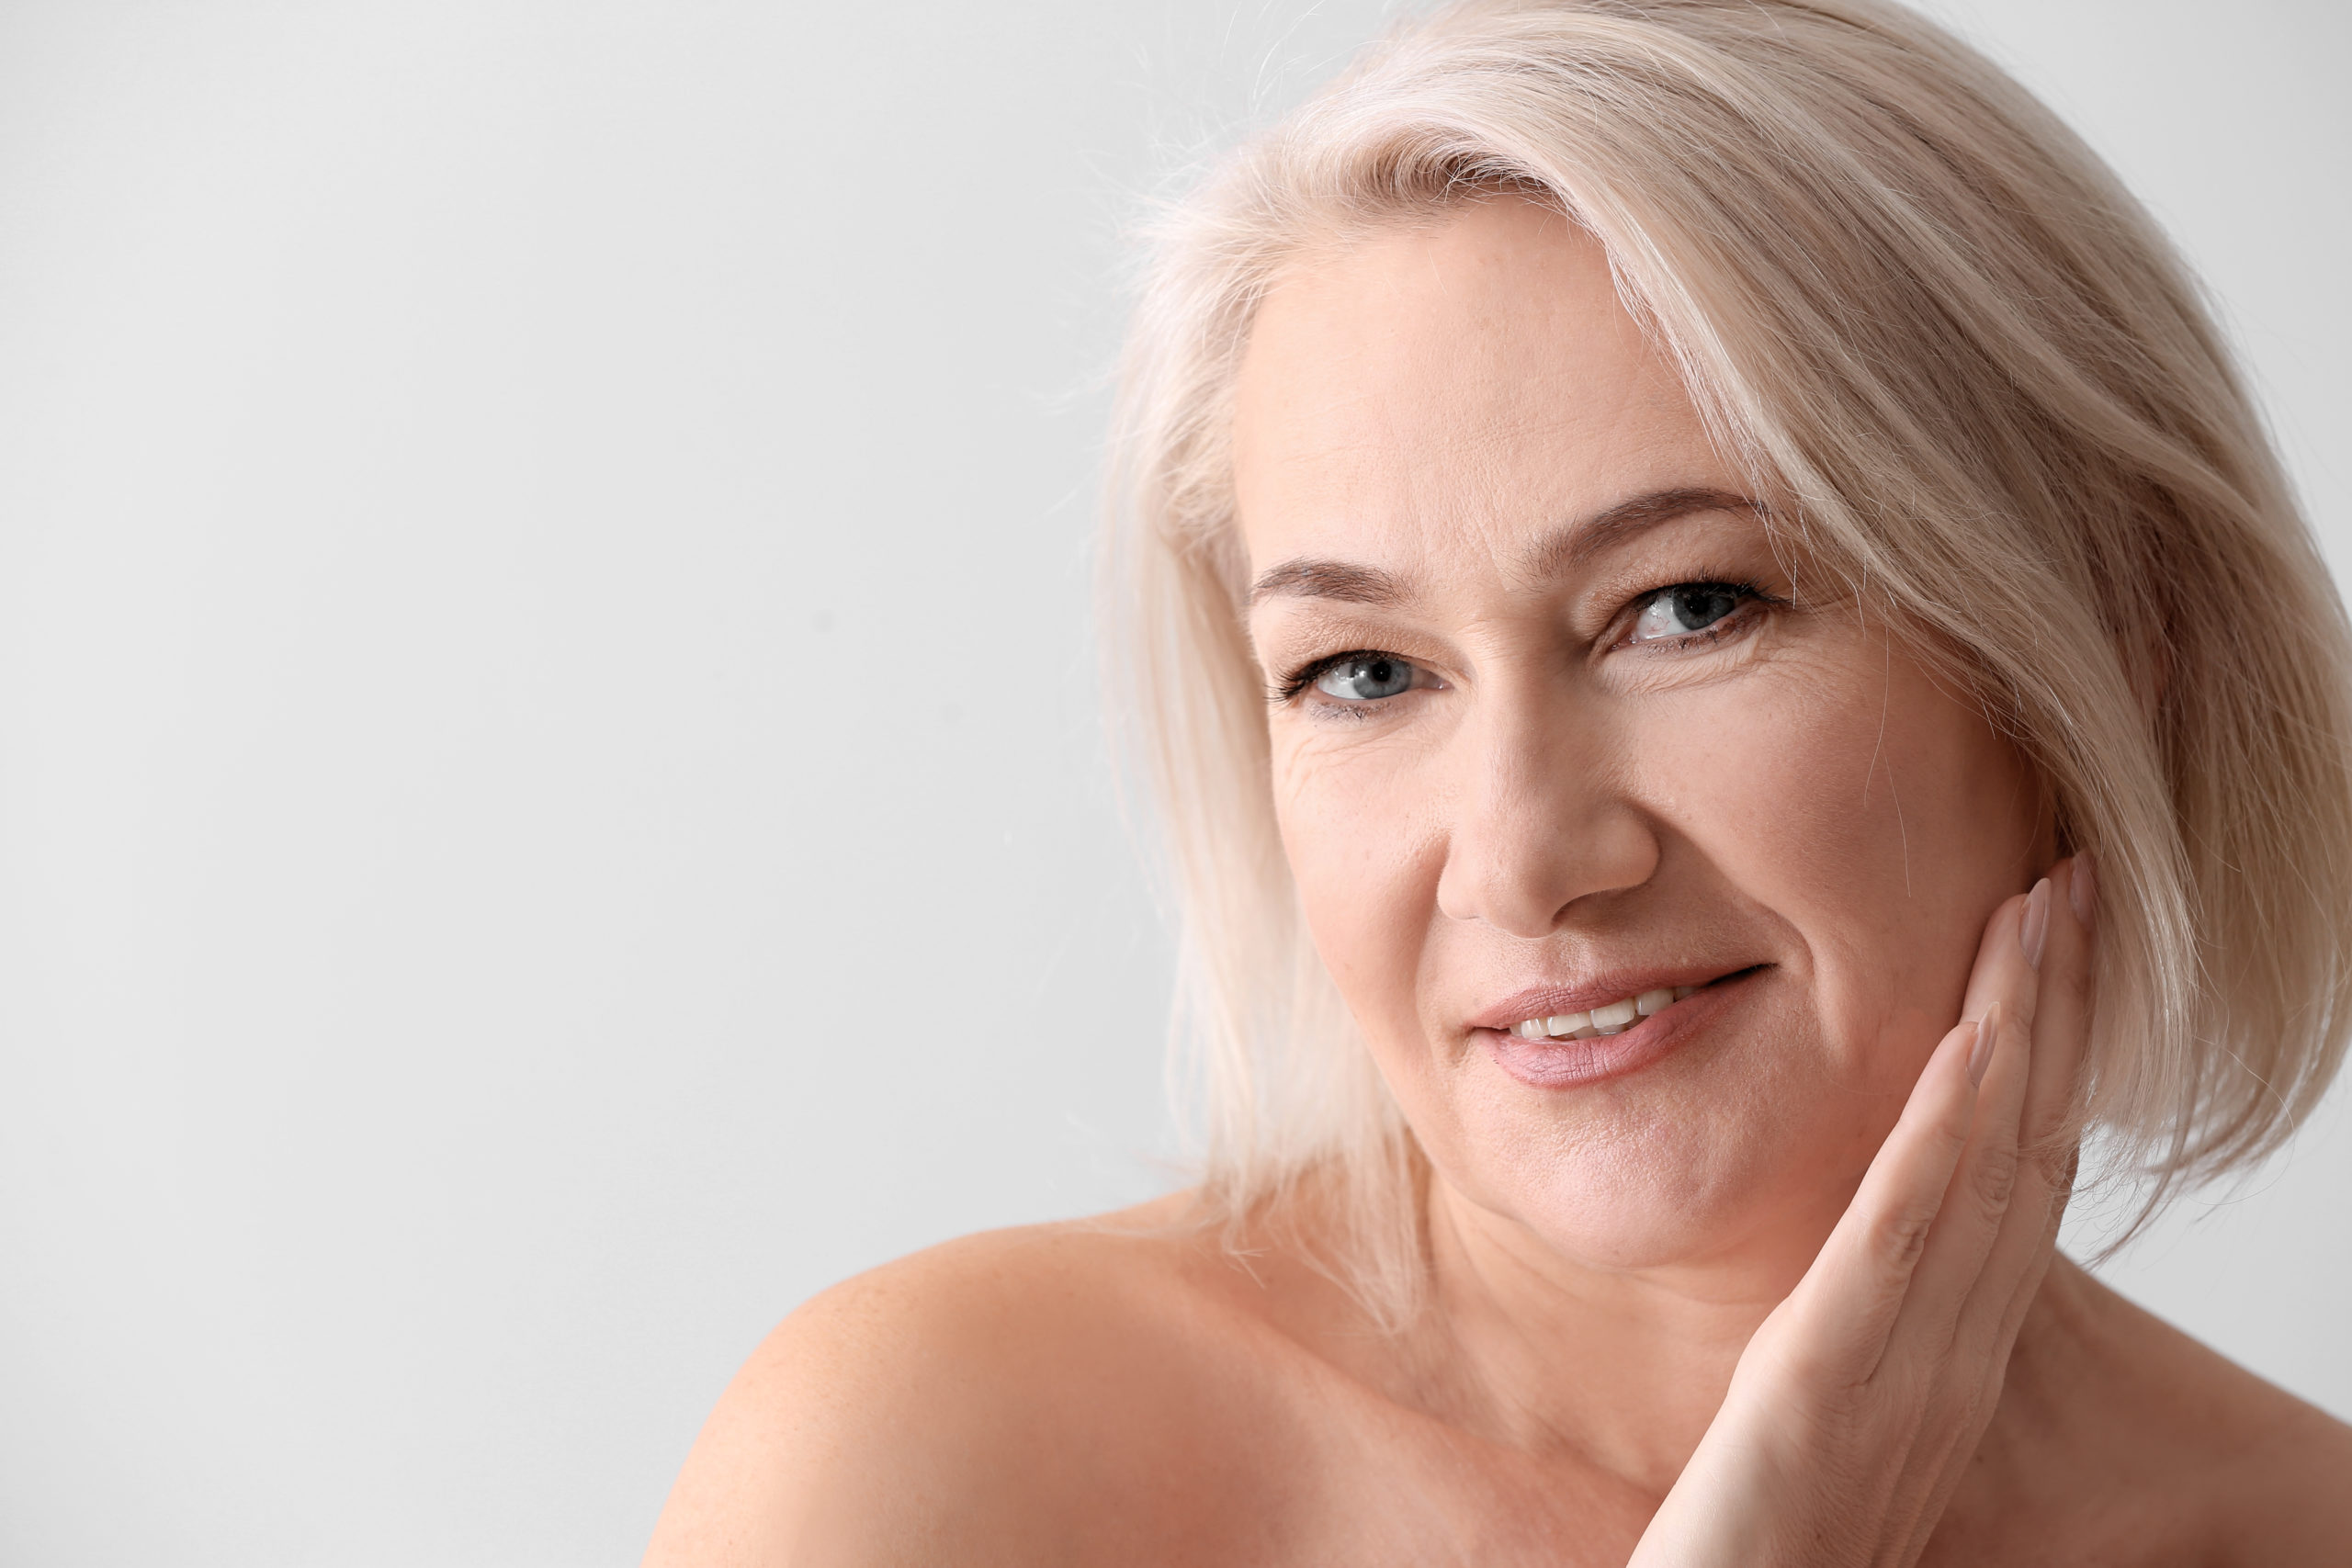 What Are The Risks Of Bioidentical Hormone Replacement Therapy